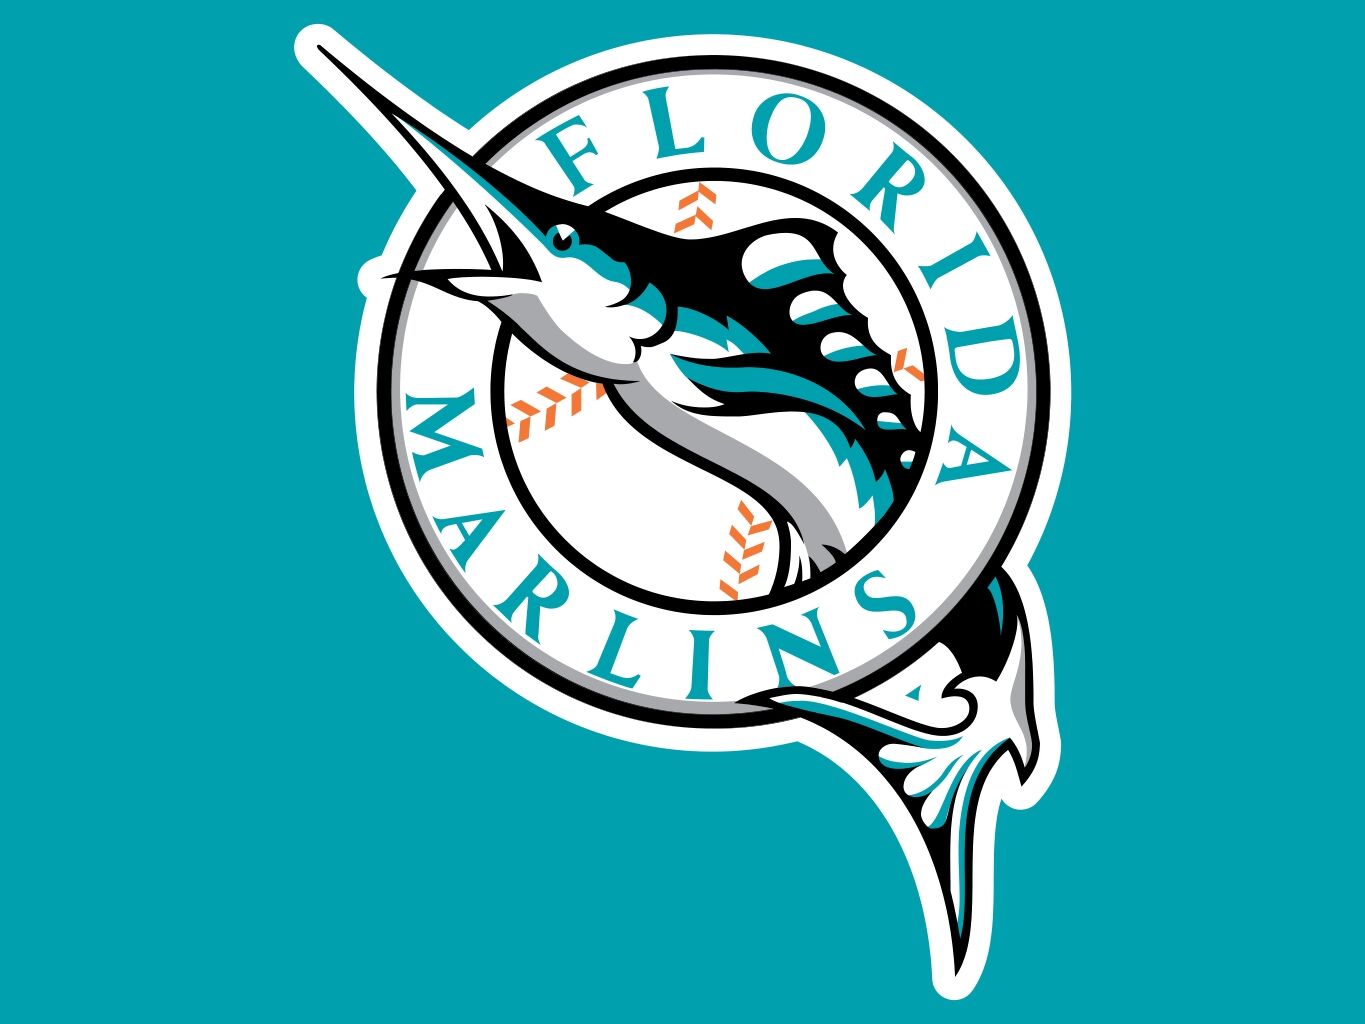 The Florida Marlins All-Time Team